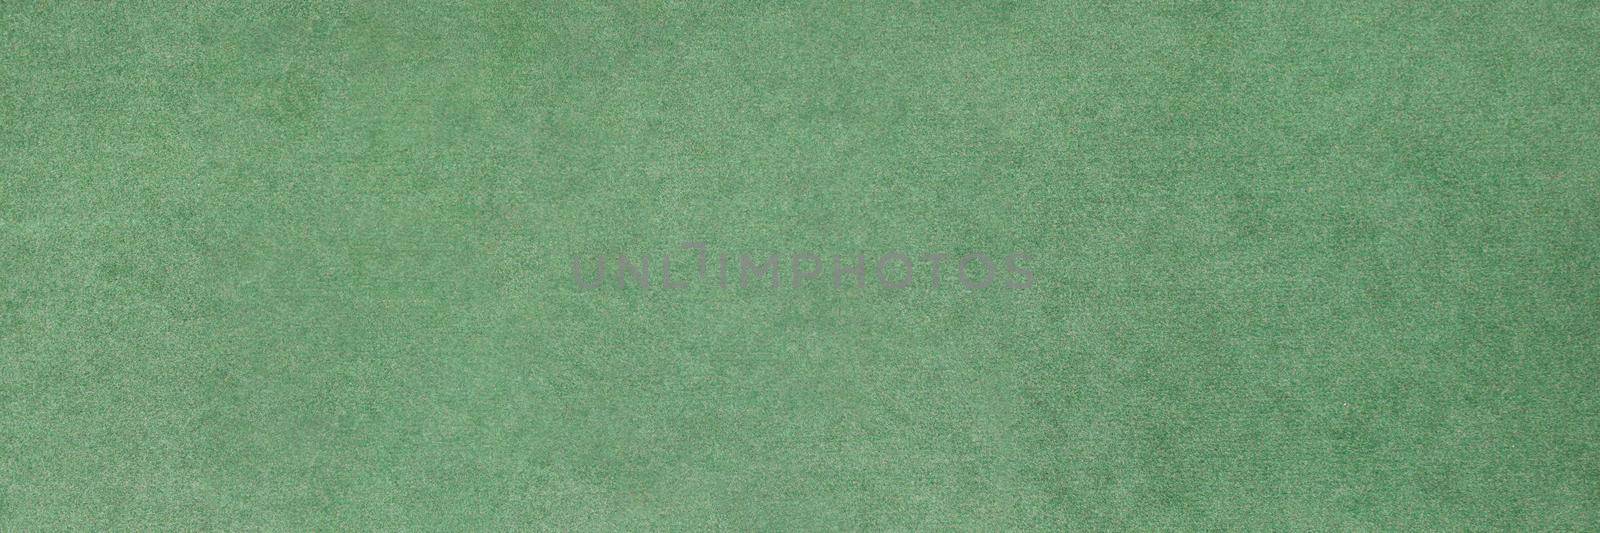 Lawn with green grass closeup background top view by kuprevich